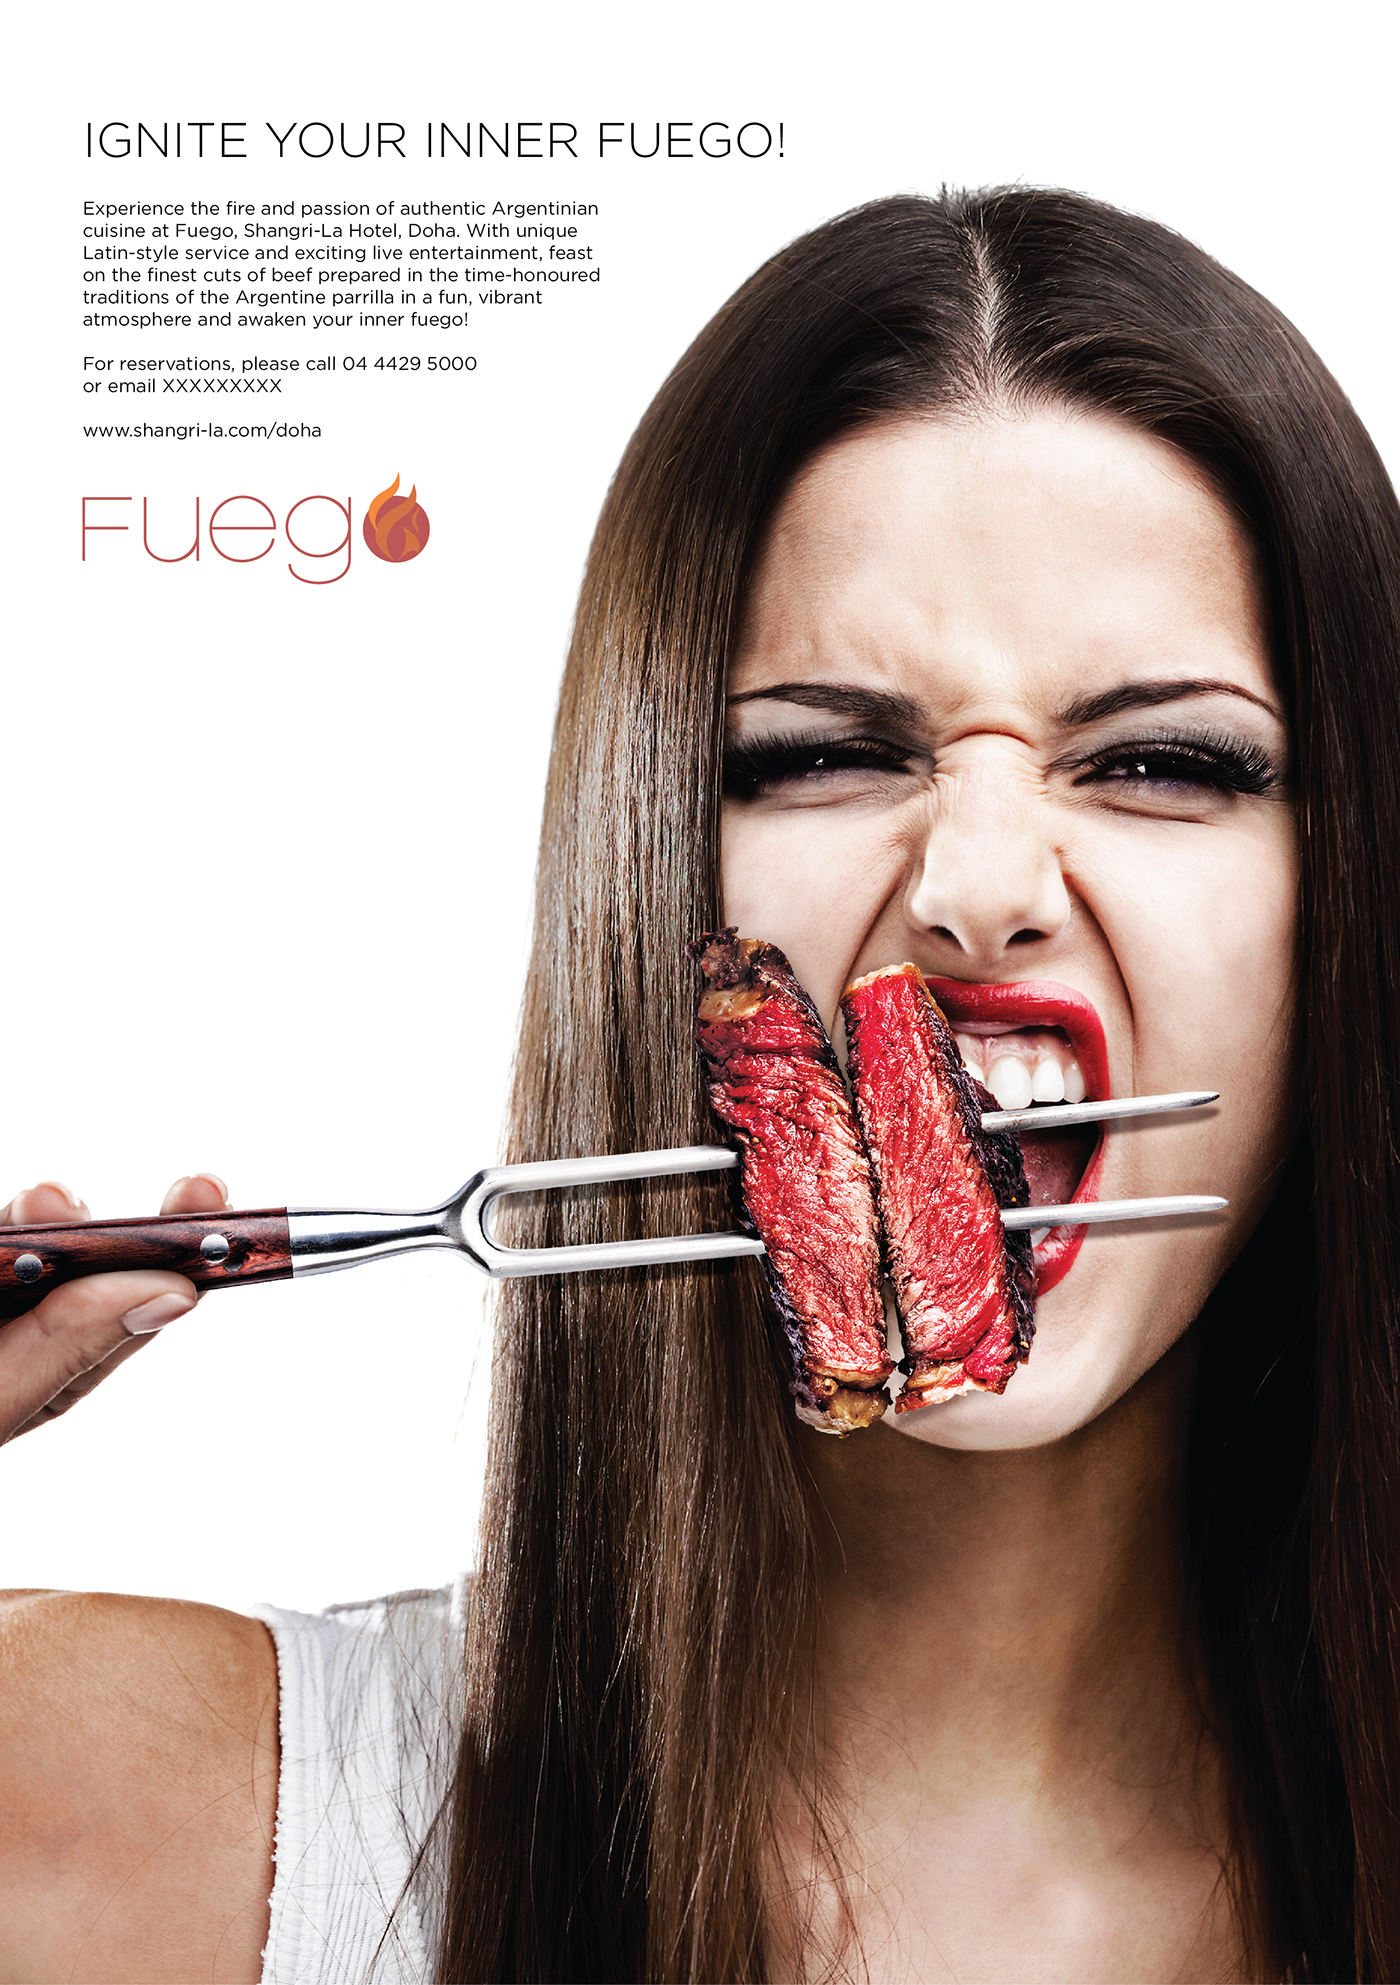 argentina South America passion fire Food  cuisine argentinian food girl bite eat Aggressive wild animal